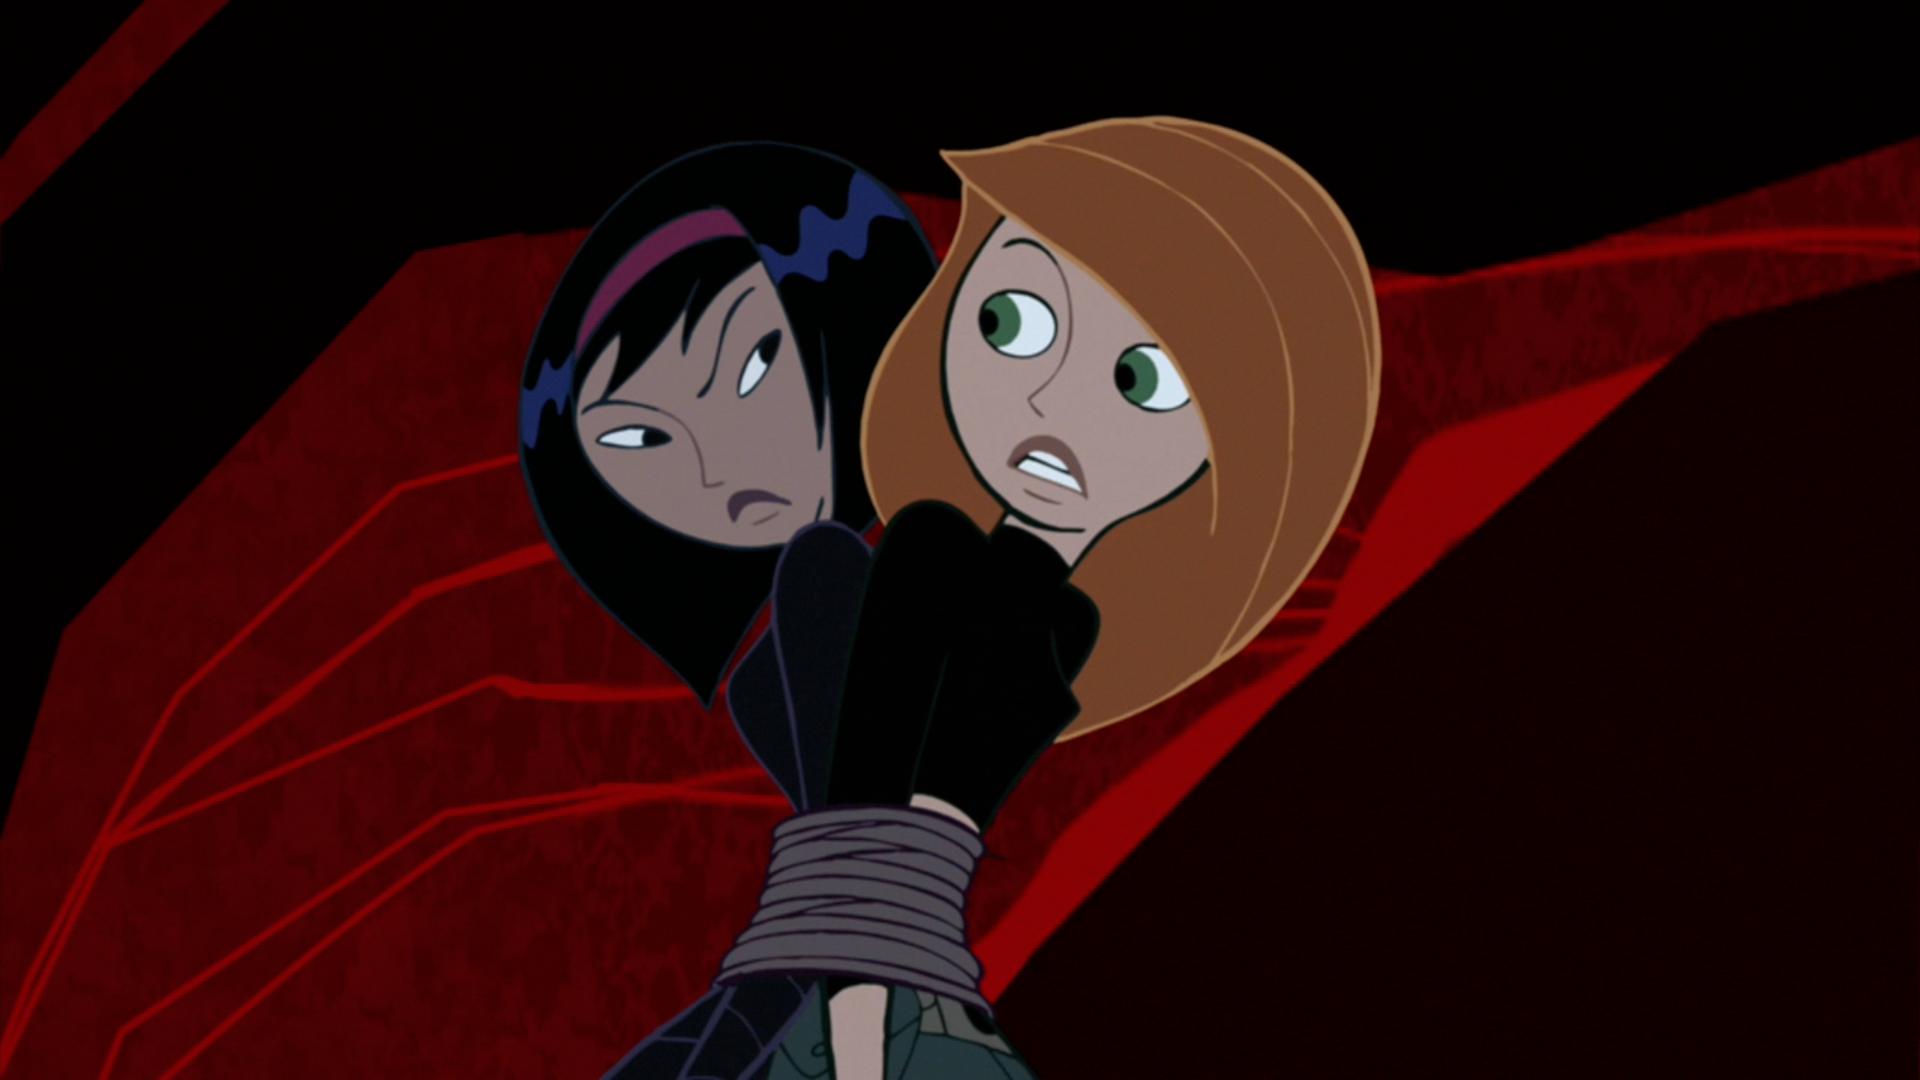 Able possible. Kim possible Episode 11. Kim possible and Ron Stoppable. Kim possible children.